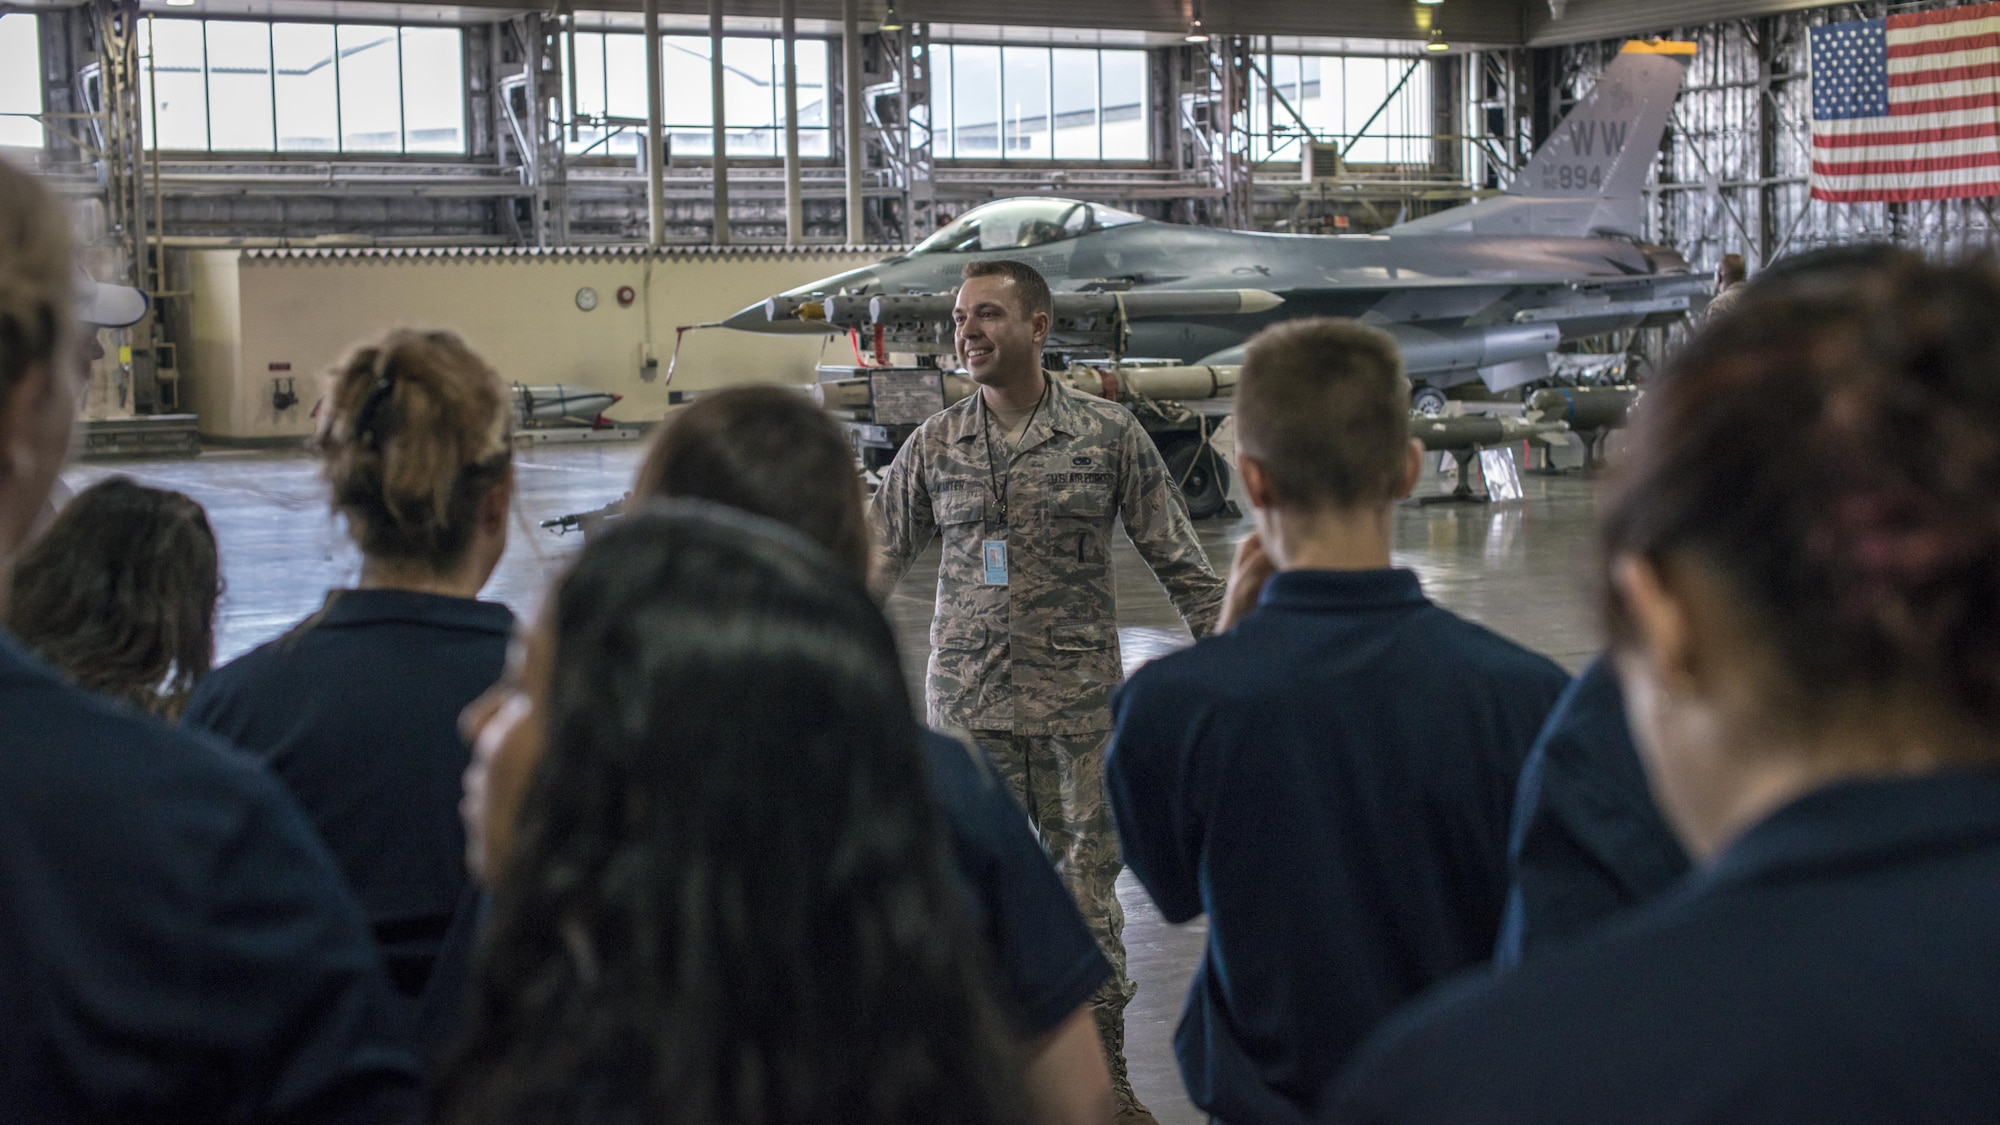 U.S. Air Force Senior Airman Robert Carter, a 35th Maintenance Group weapons lead crew member, talks with a group of delegates from Wenatchee Valley, Washington, during their base familiarization tour at Misawa Air Base, Japan, Aug. 24, 2017.